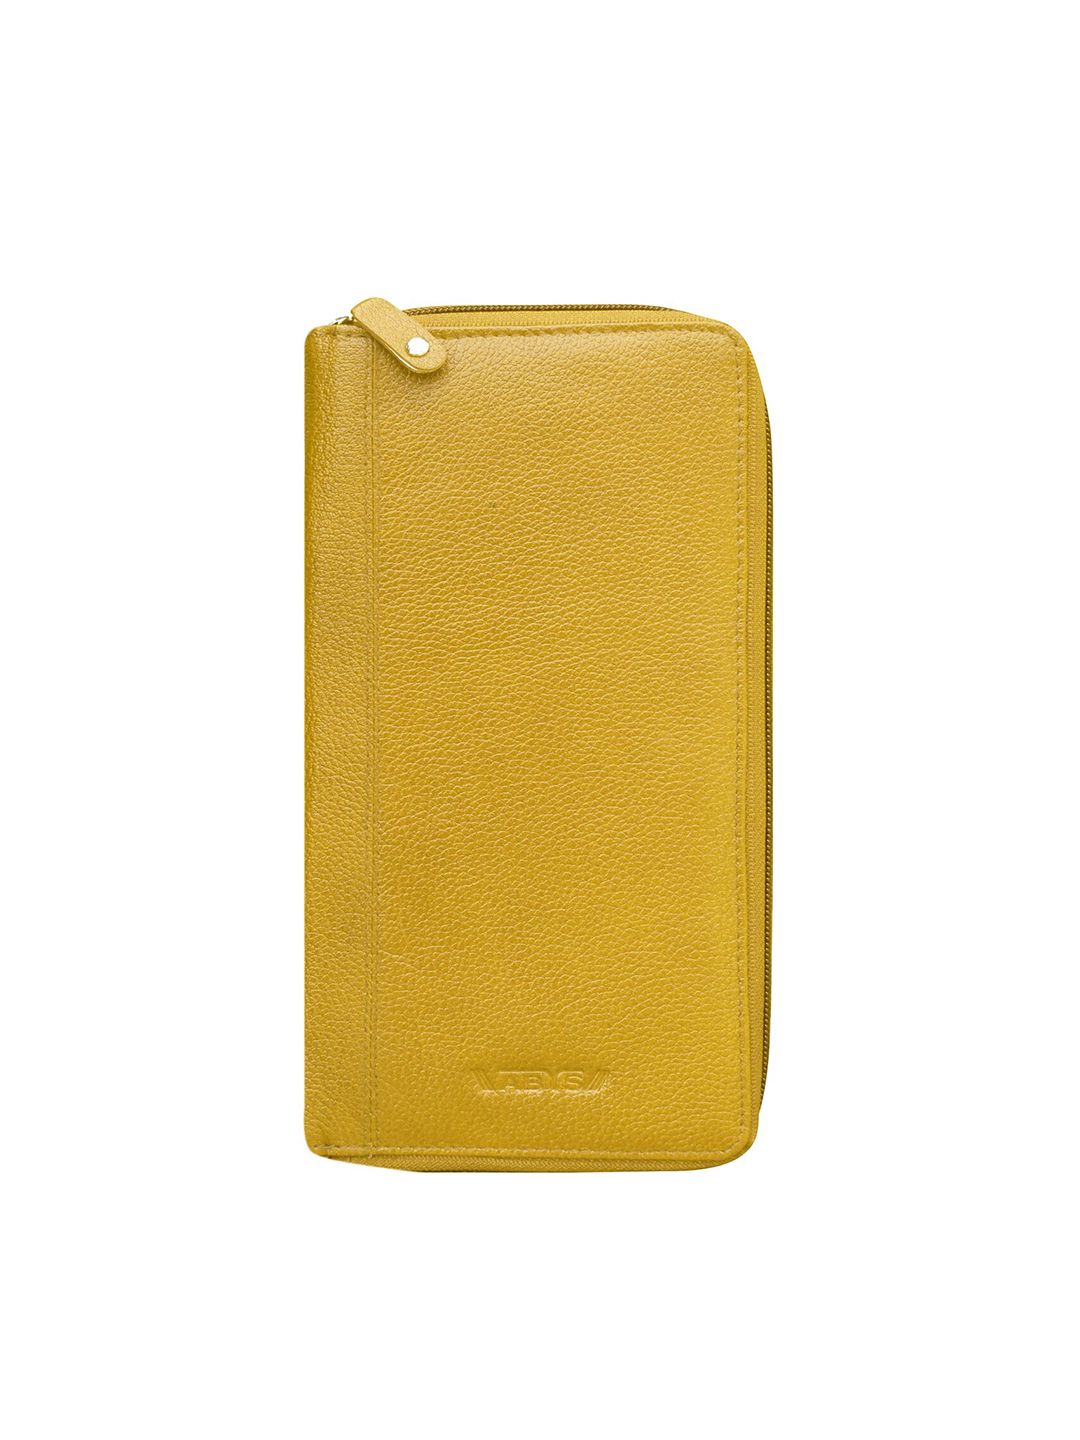 ABYS Unisex Yellow Leather Zip Around Wallet with Passport Holder Price in India